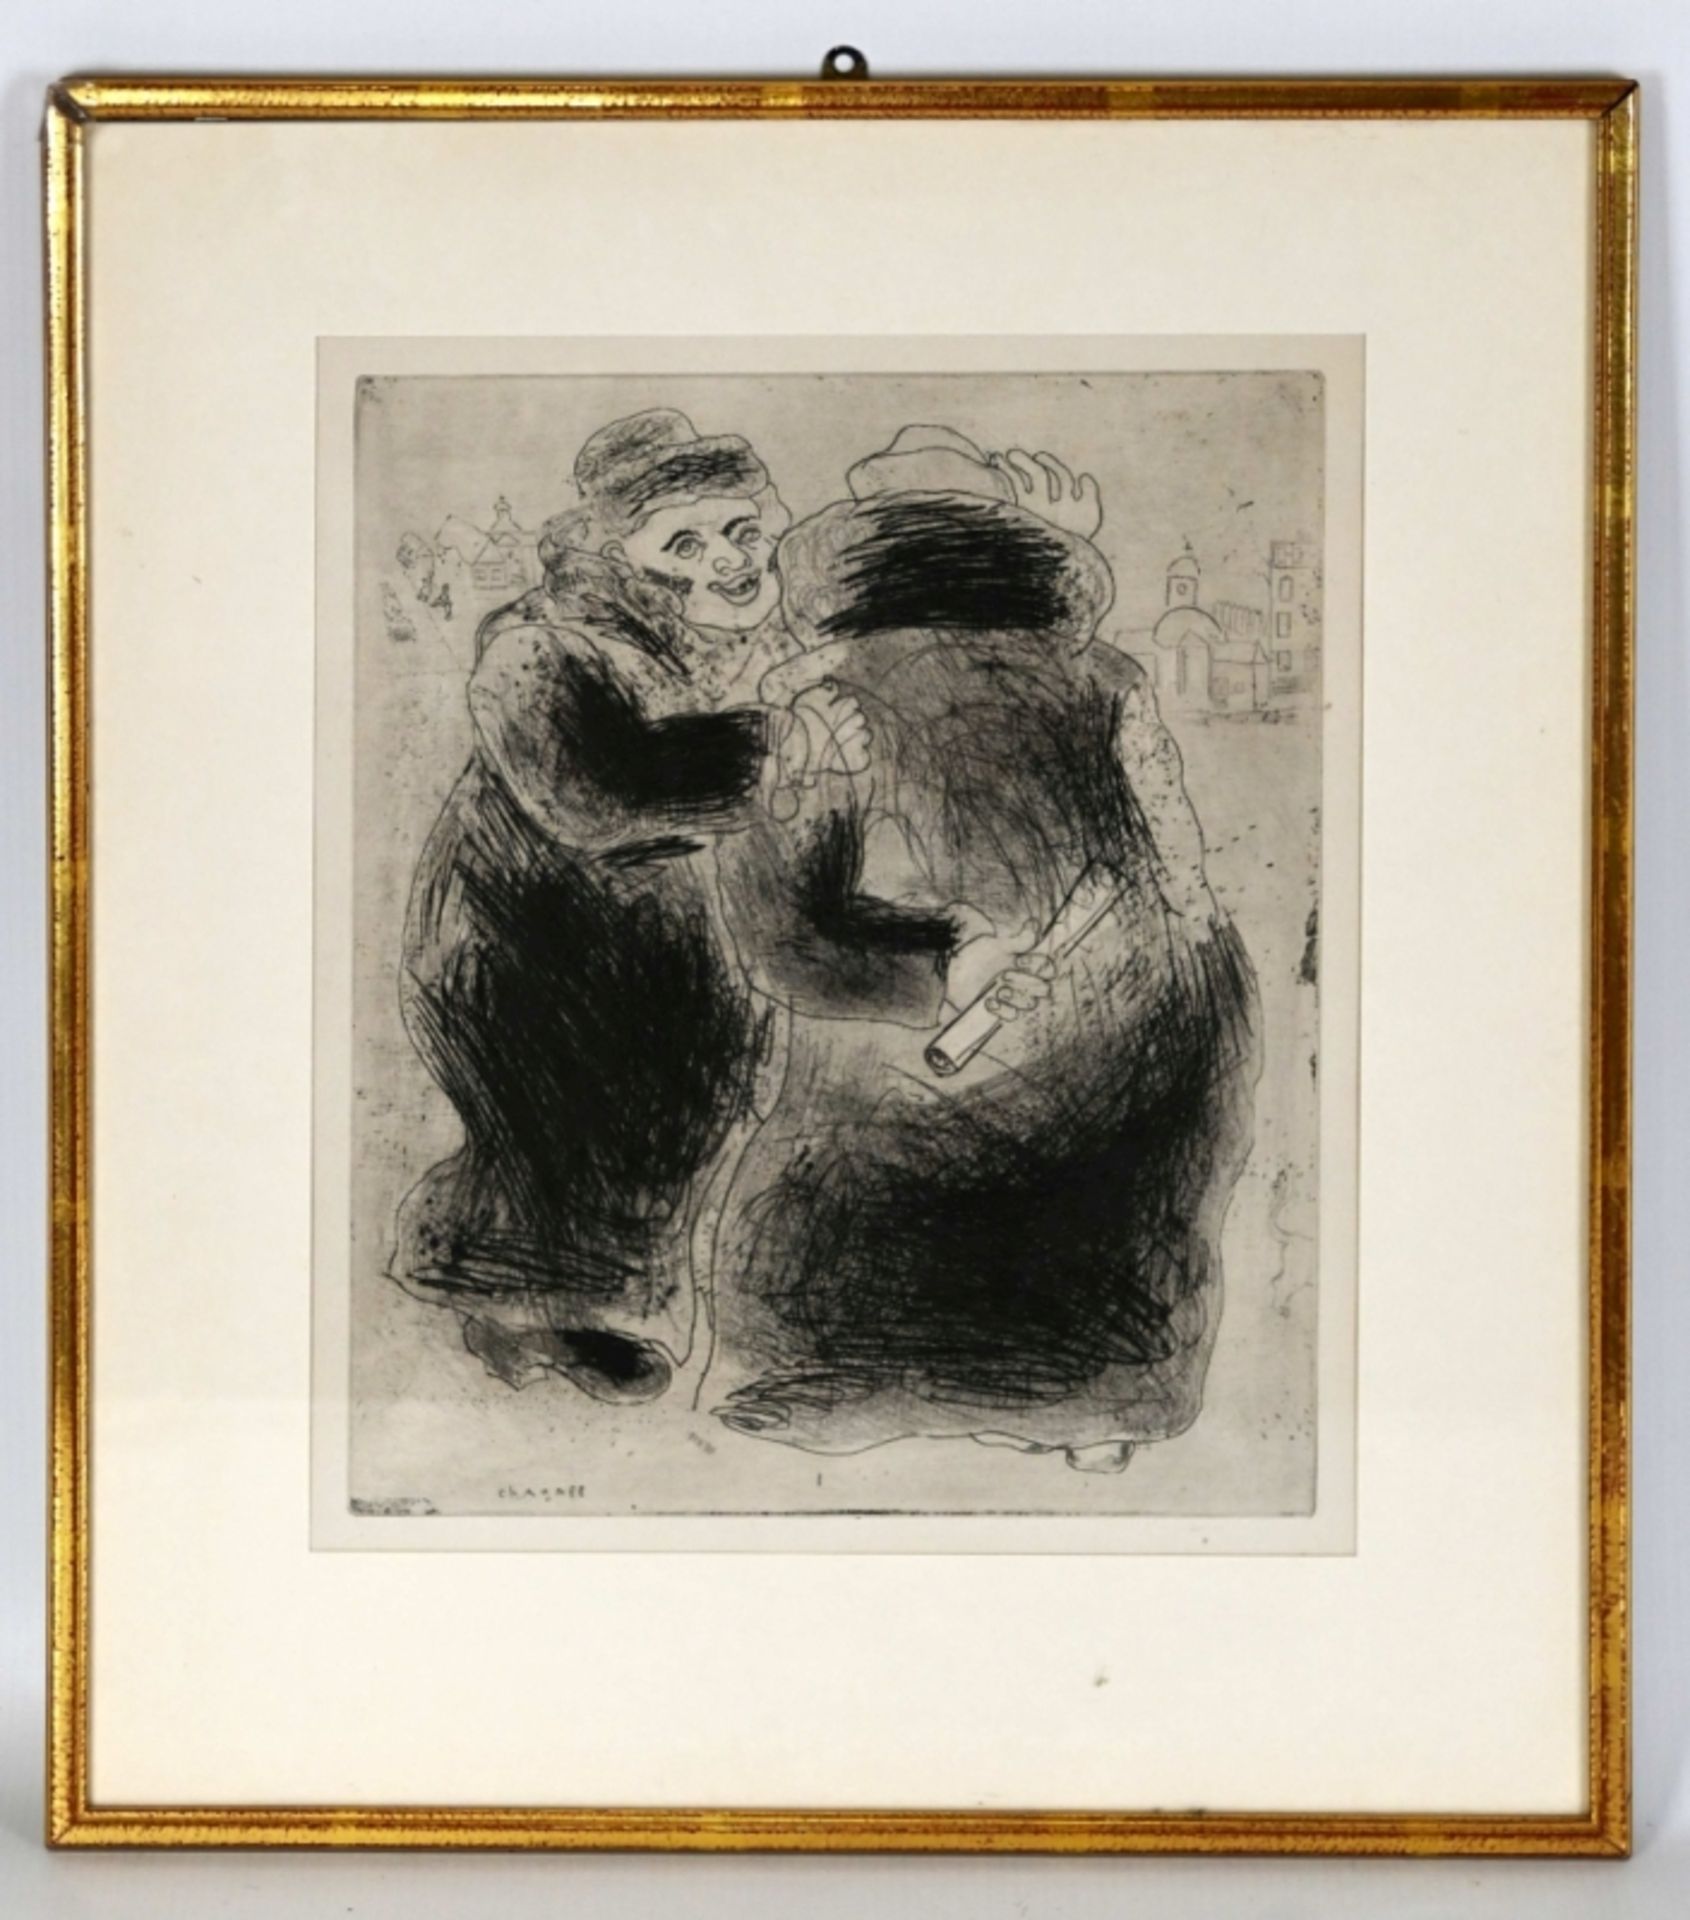 CHAGALL "Zwei Rabiner" - Image 3 of 4